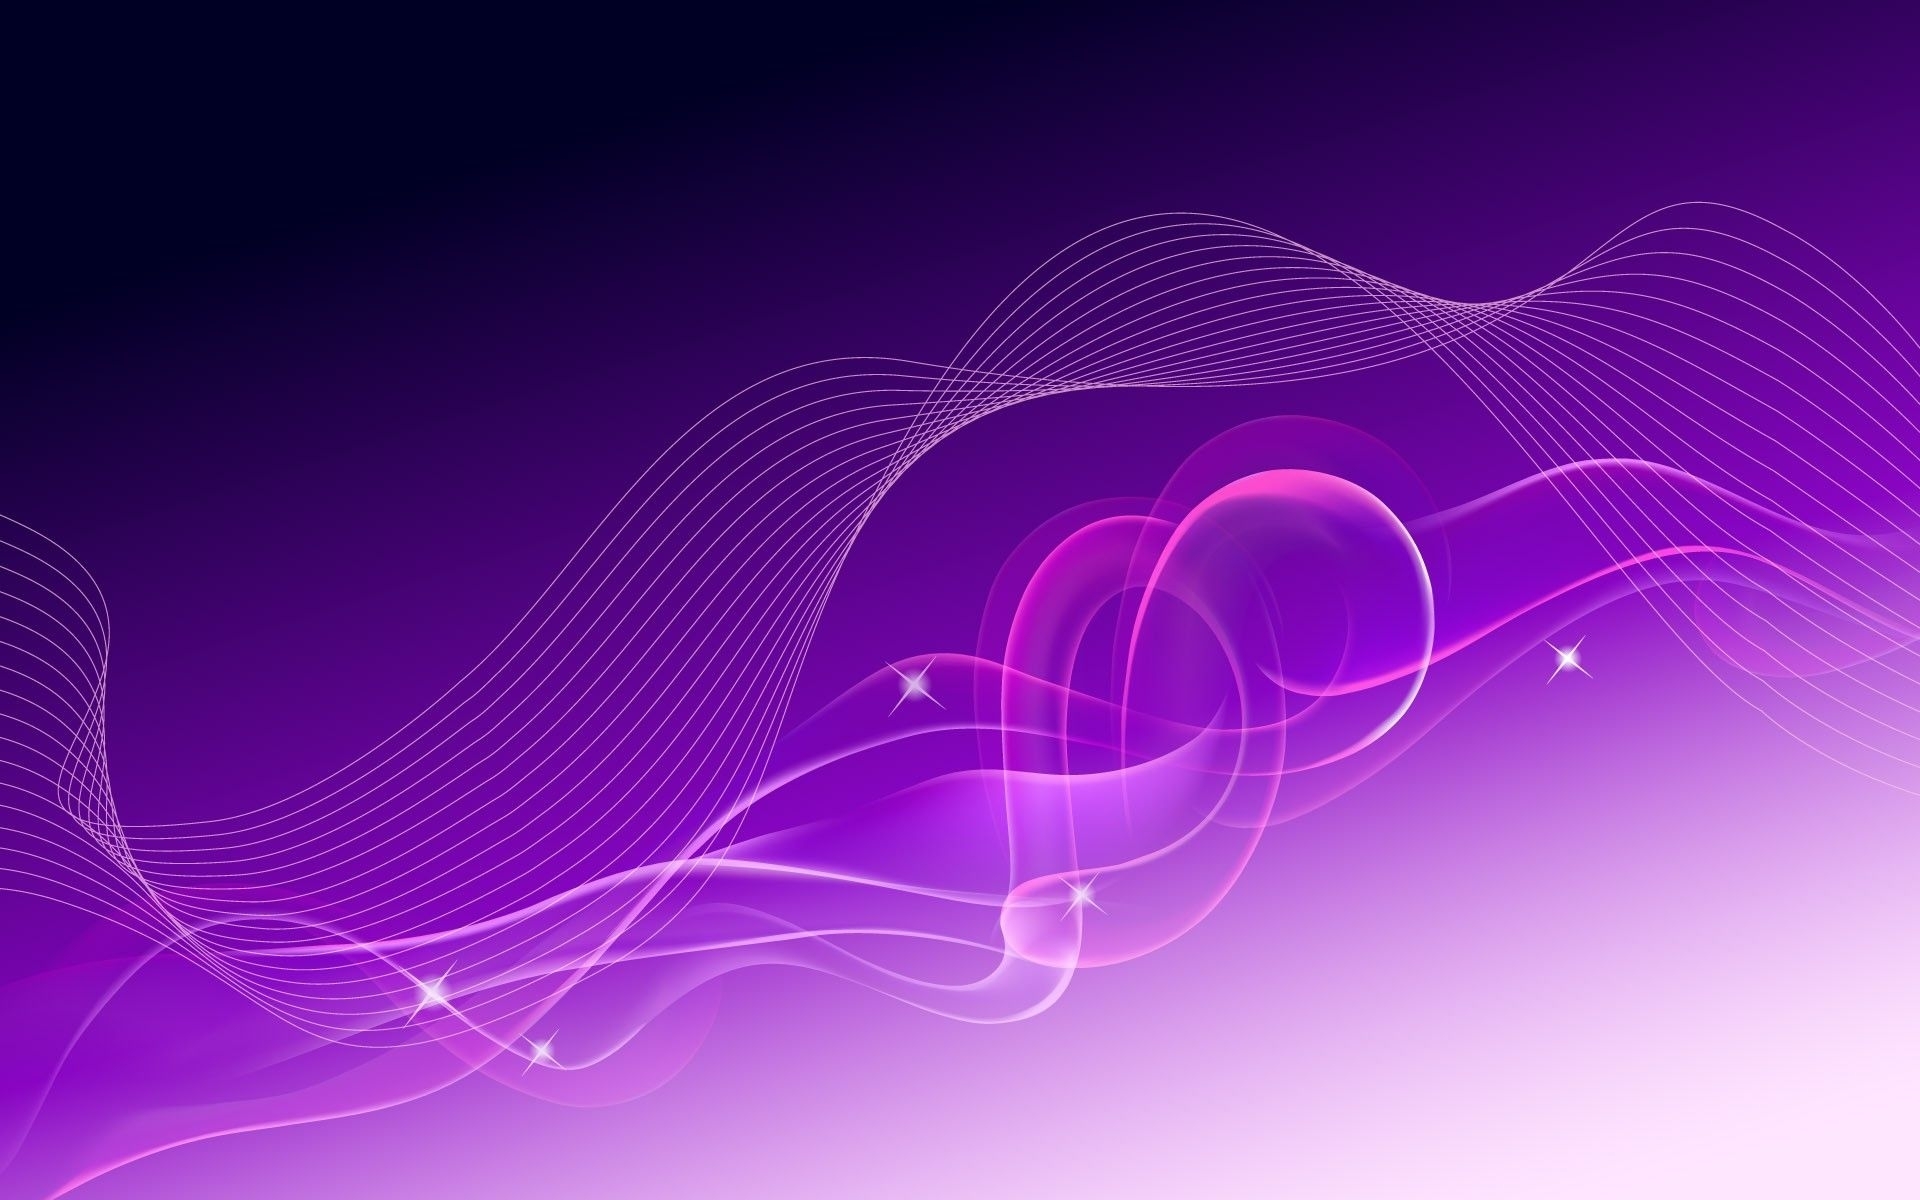 10 Best Cool Purple 3D Abstract Backgrounds FULL HD 1920×1080 For PC Background